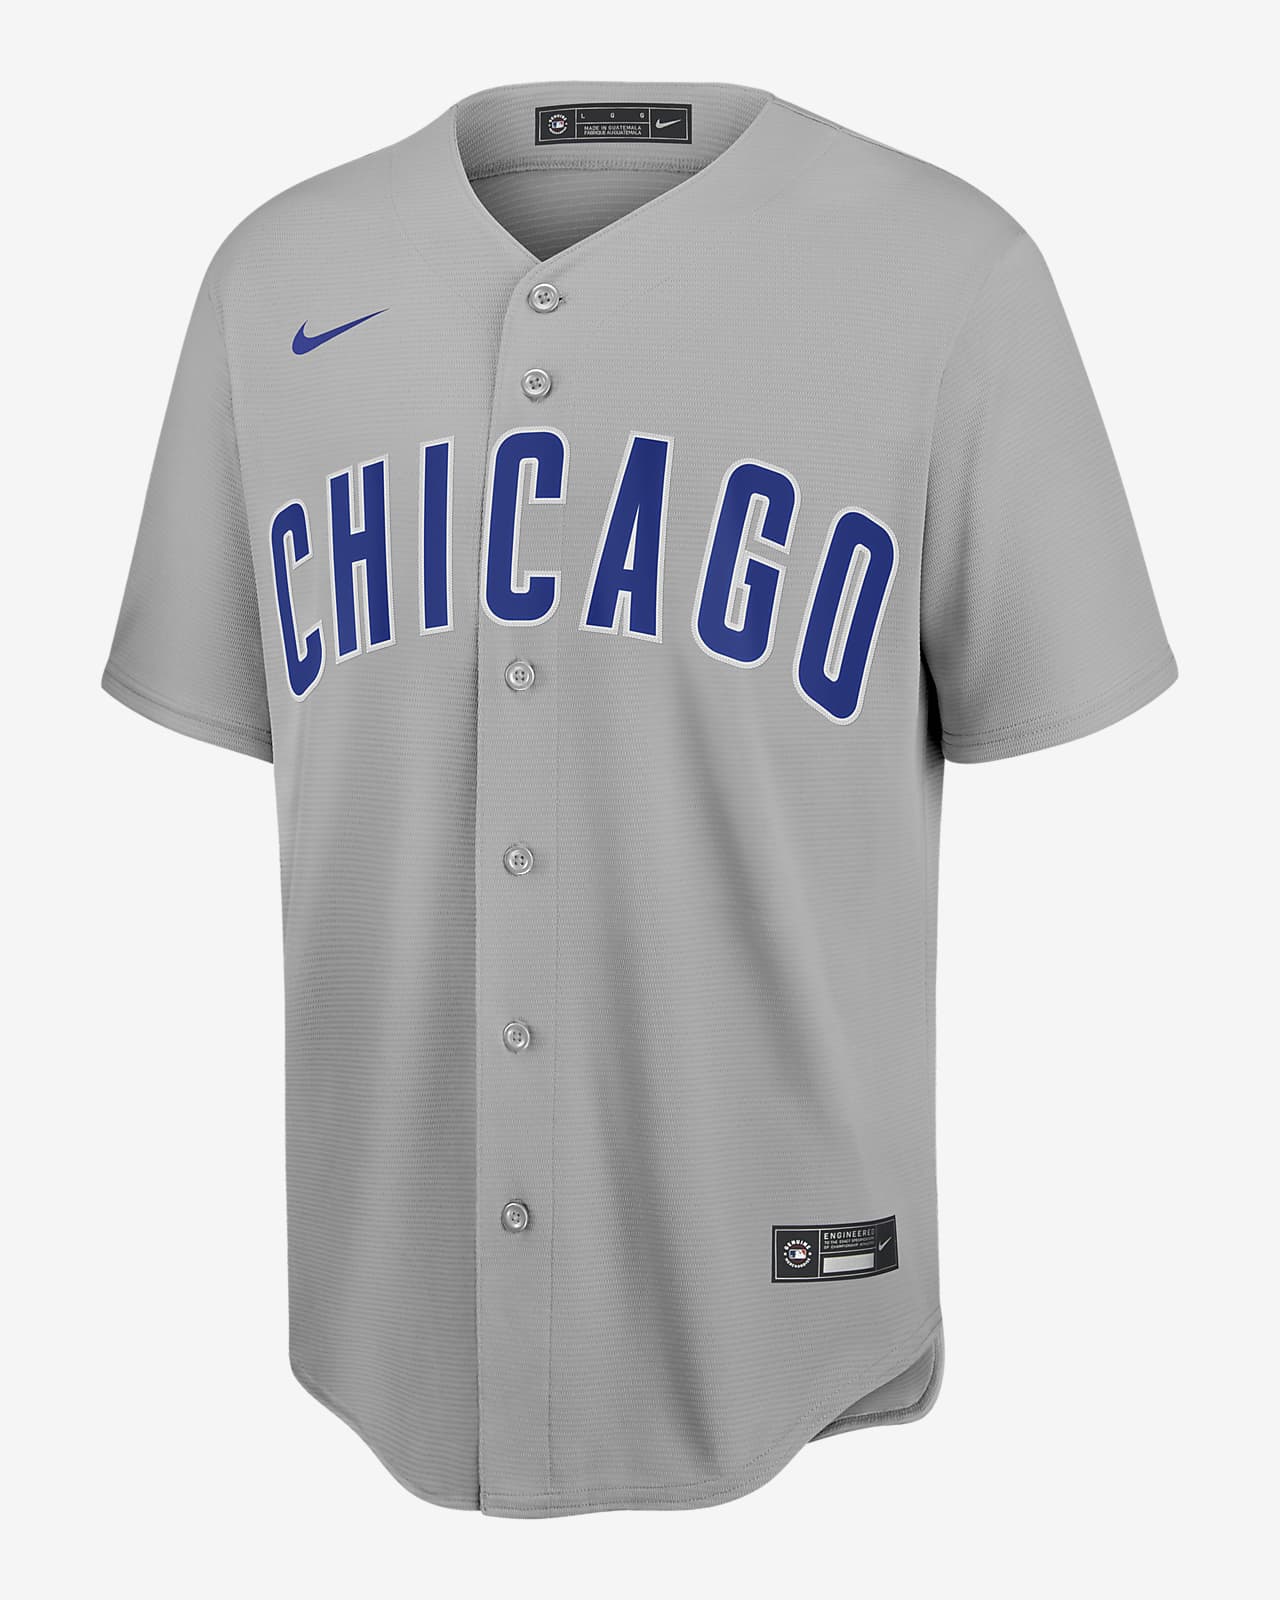 where to buy a cubs jersey